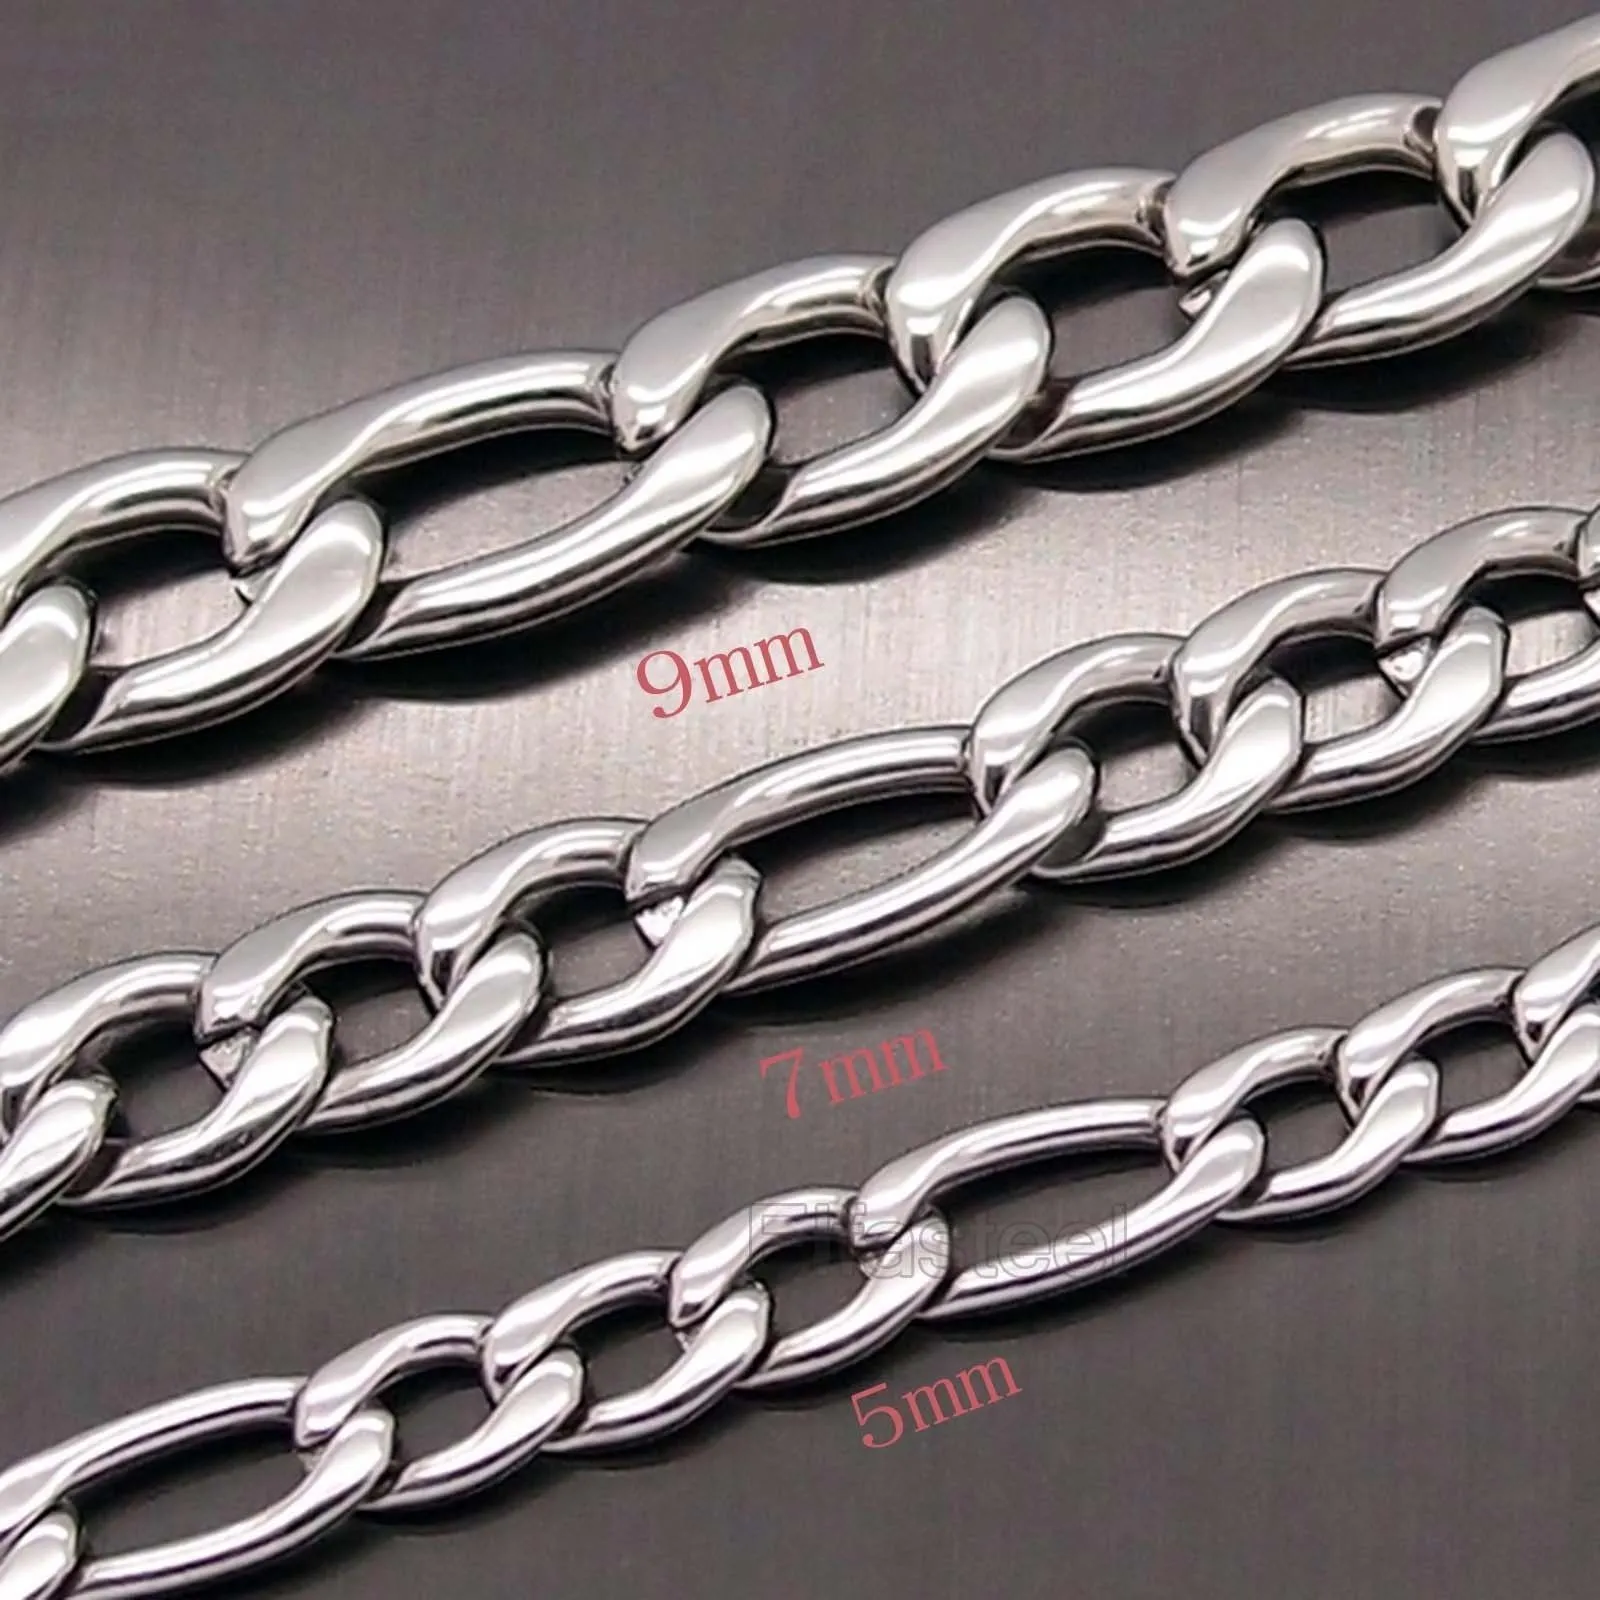 on sale 3meter lot stainless steel Fashion Findings chain marking chain Silver NK Figaro Chain 4mm/6mm/7mm/9mm/12mm wide choose